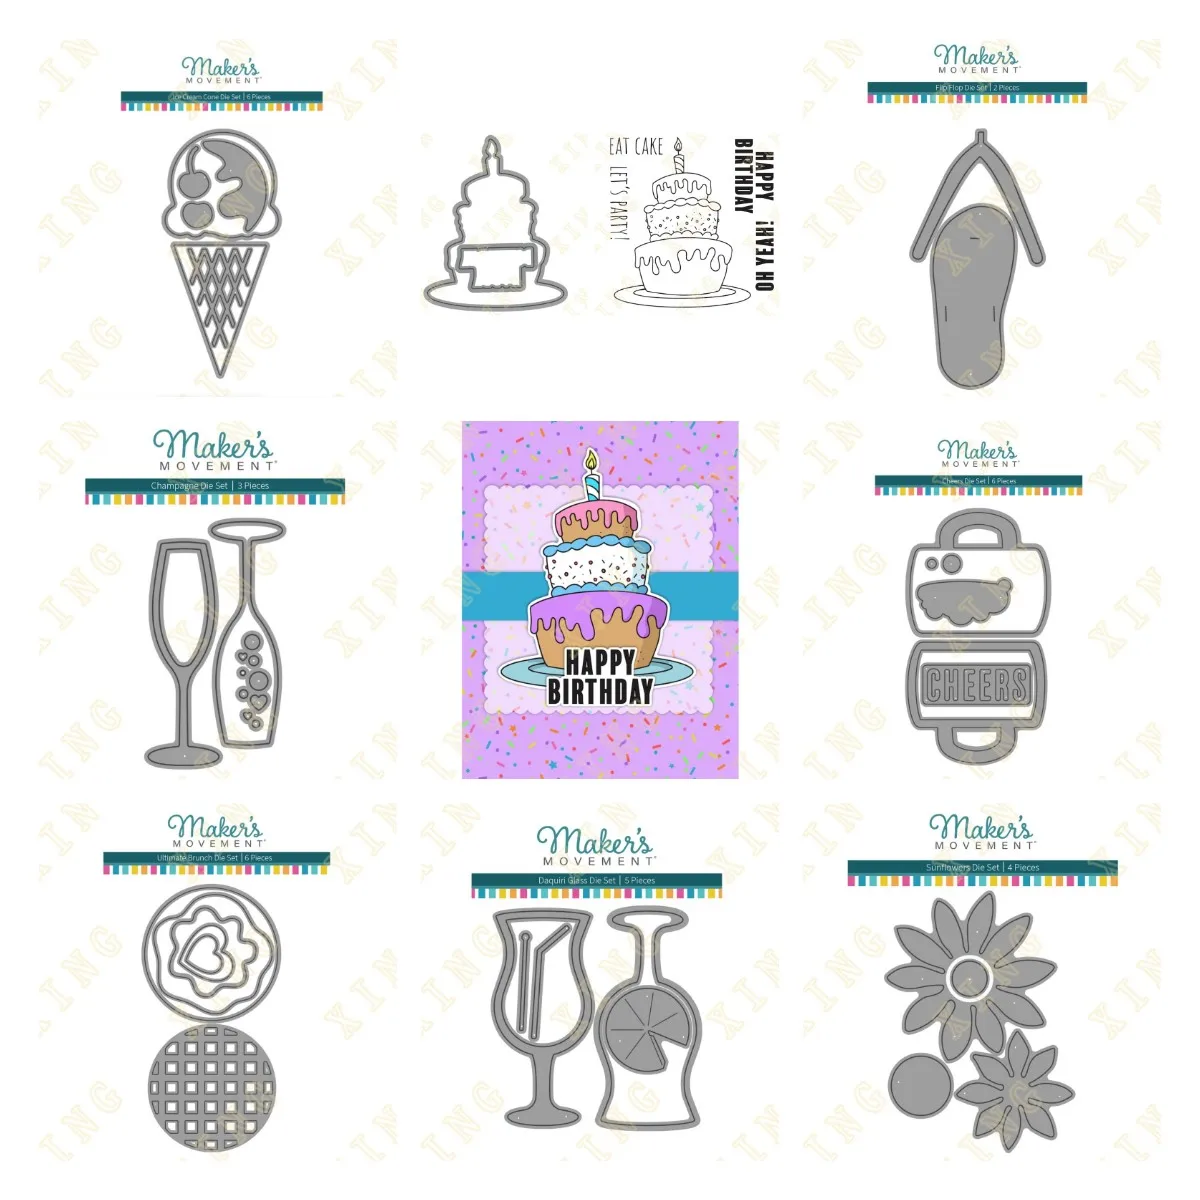 

Glass Flip Flop Sunflower Champagne Ice Cream New Metal Cutting Dies Clear Stamps Scrapbook Diary Decoration Embossing Template